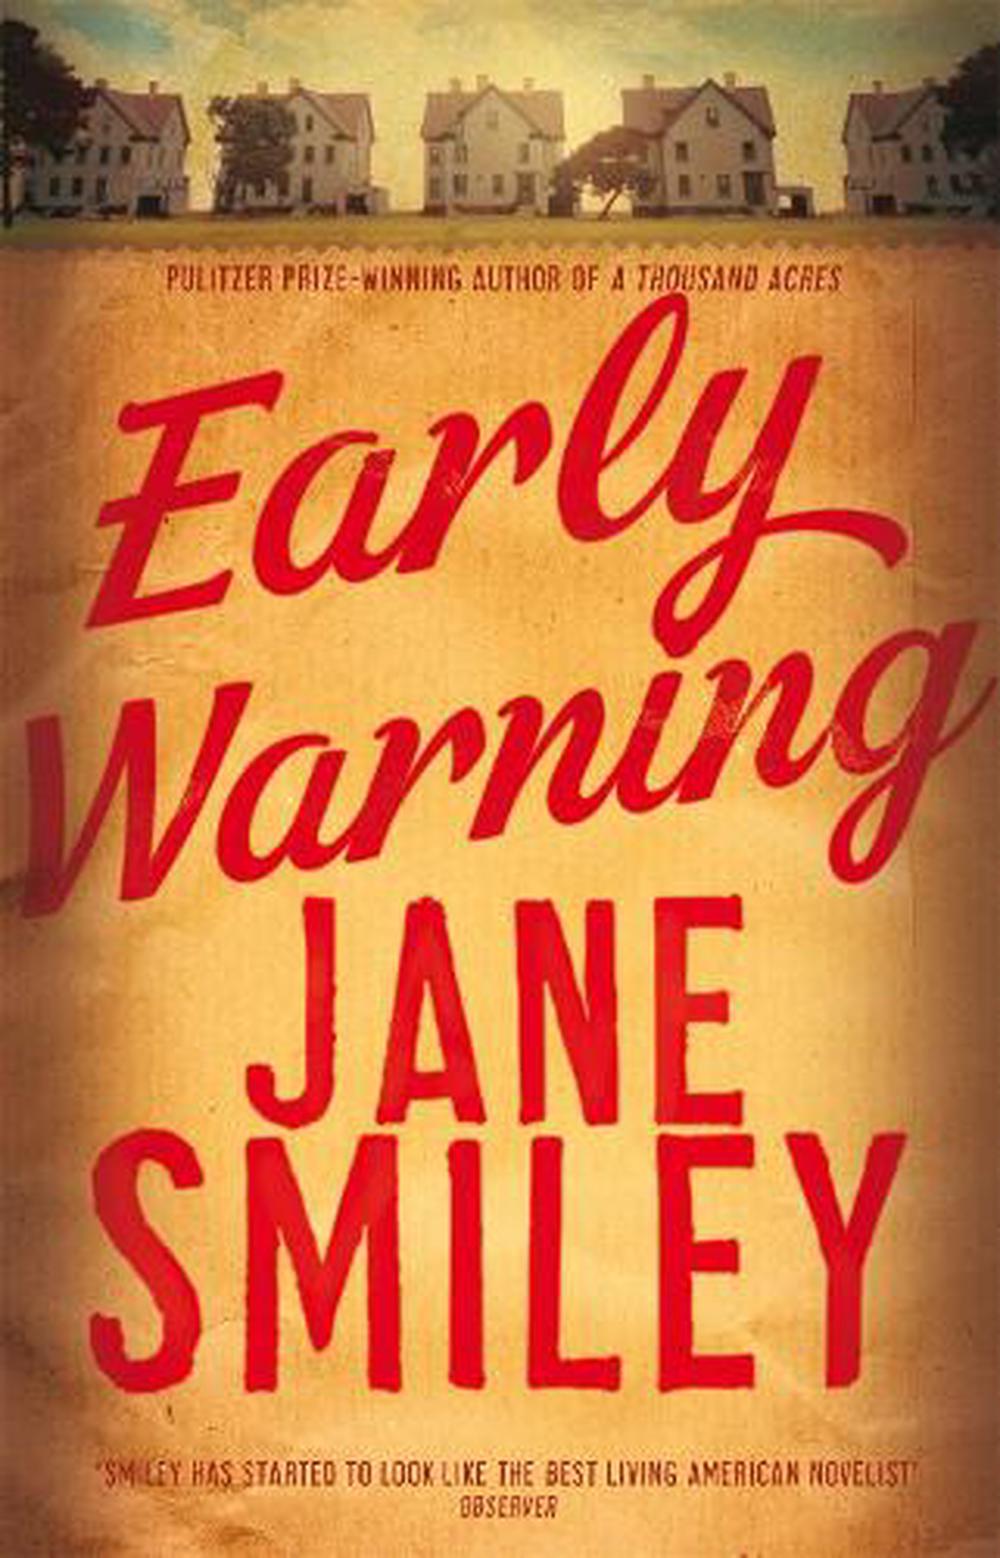 moo jane smiley book review